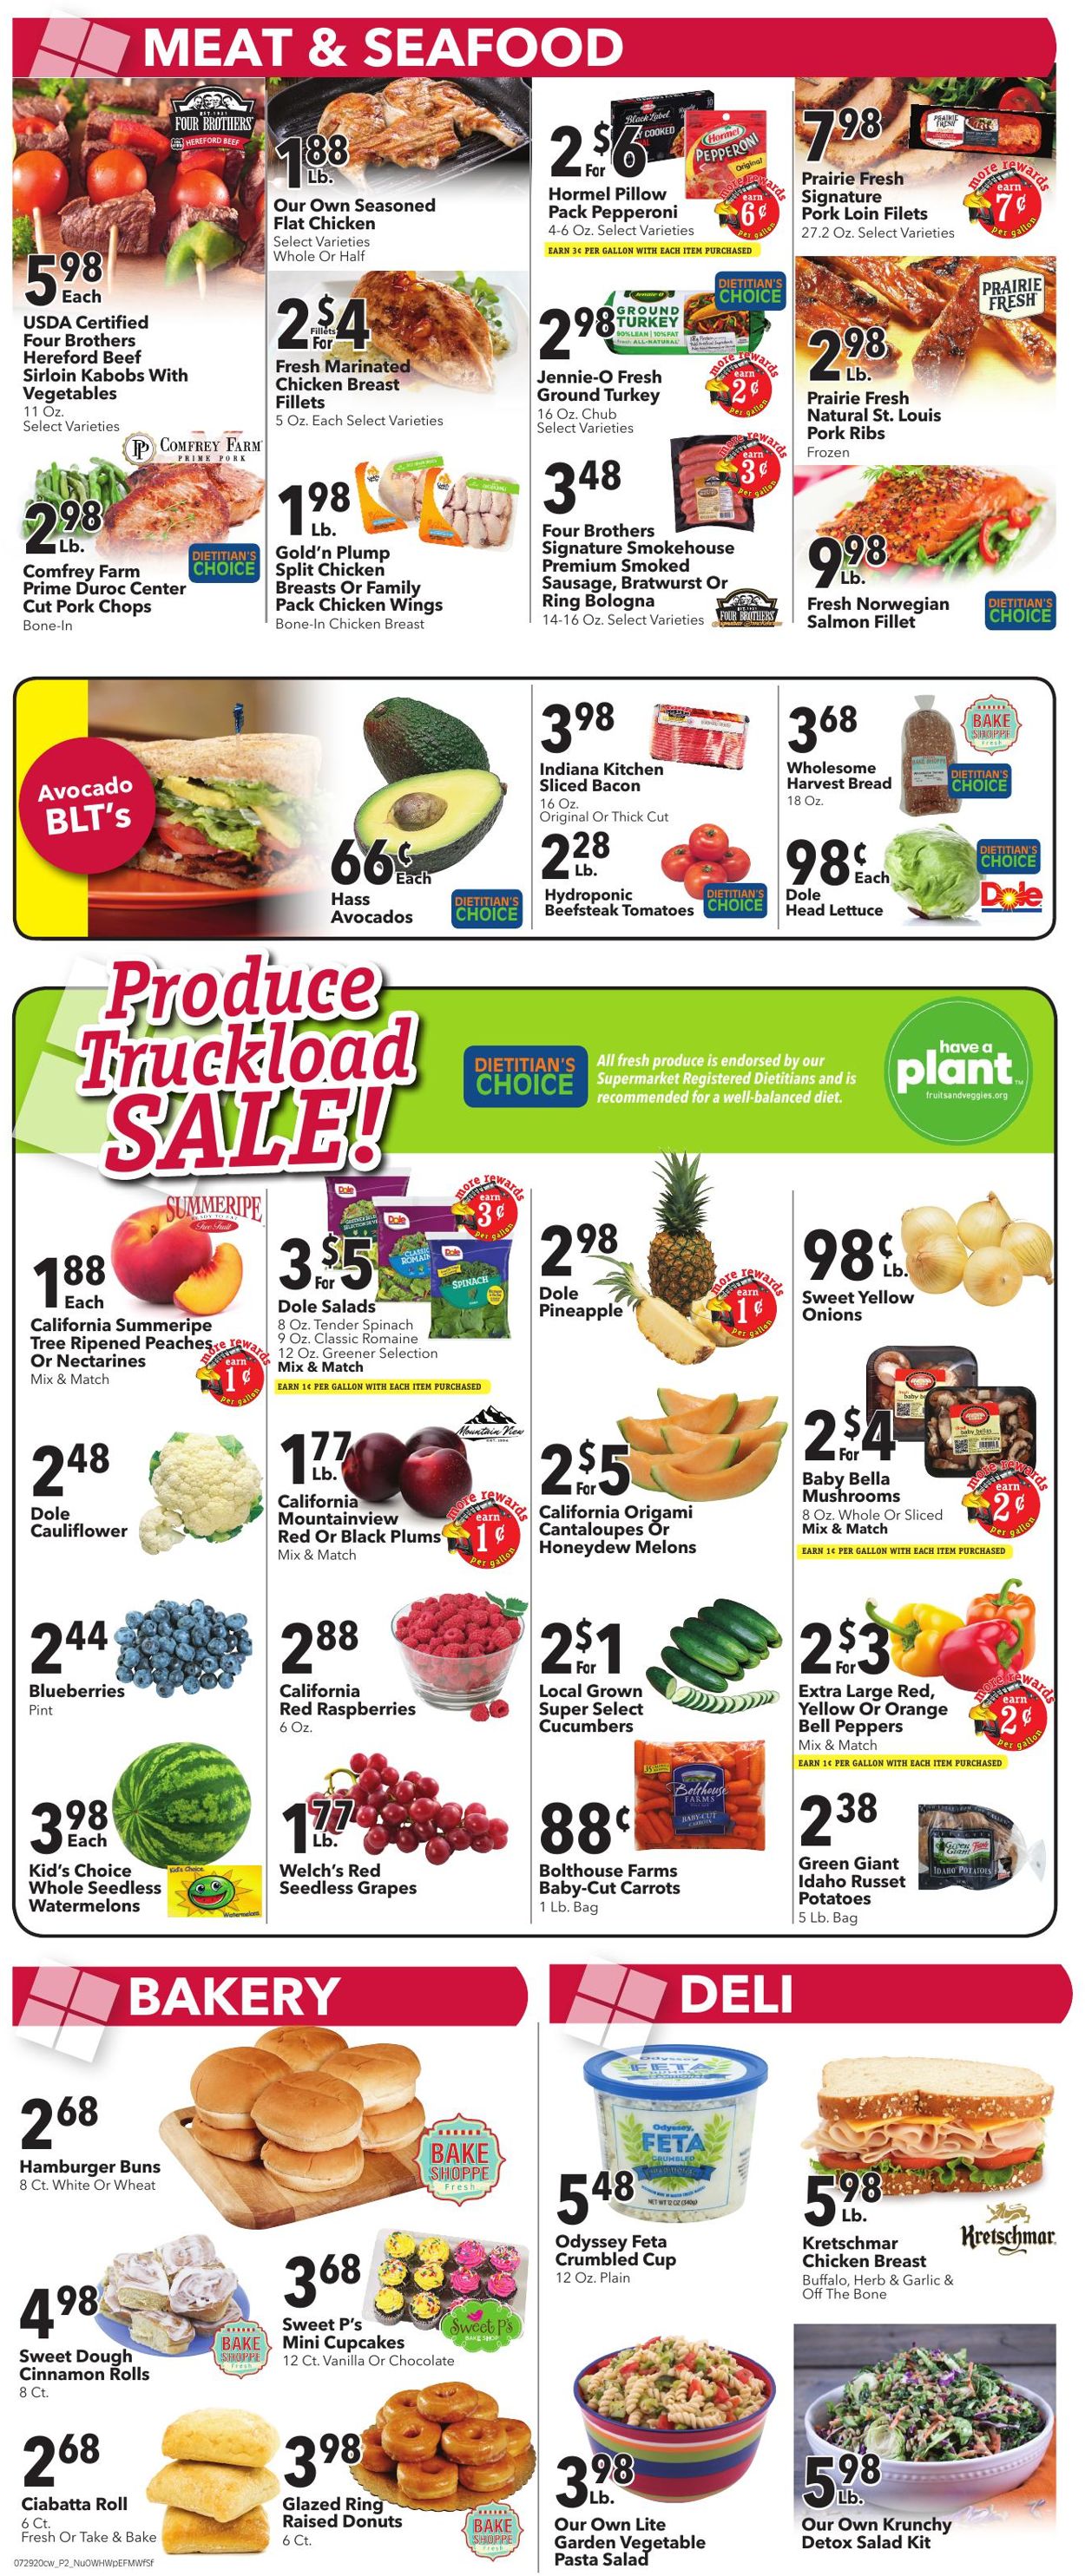 Cash Wise Weekly Ad Circular - valid 07/29-08/04/2020 (Page 2)